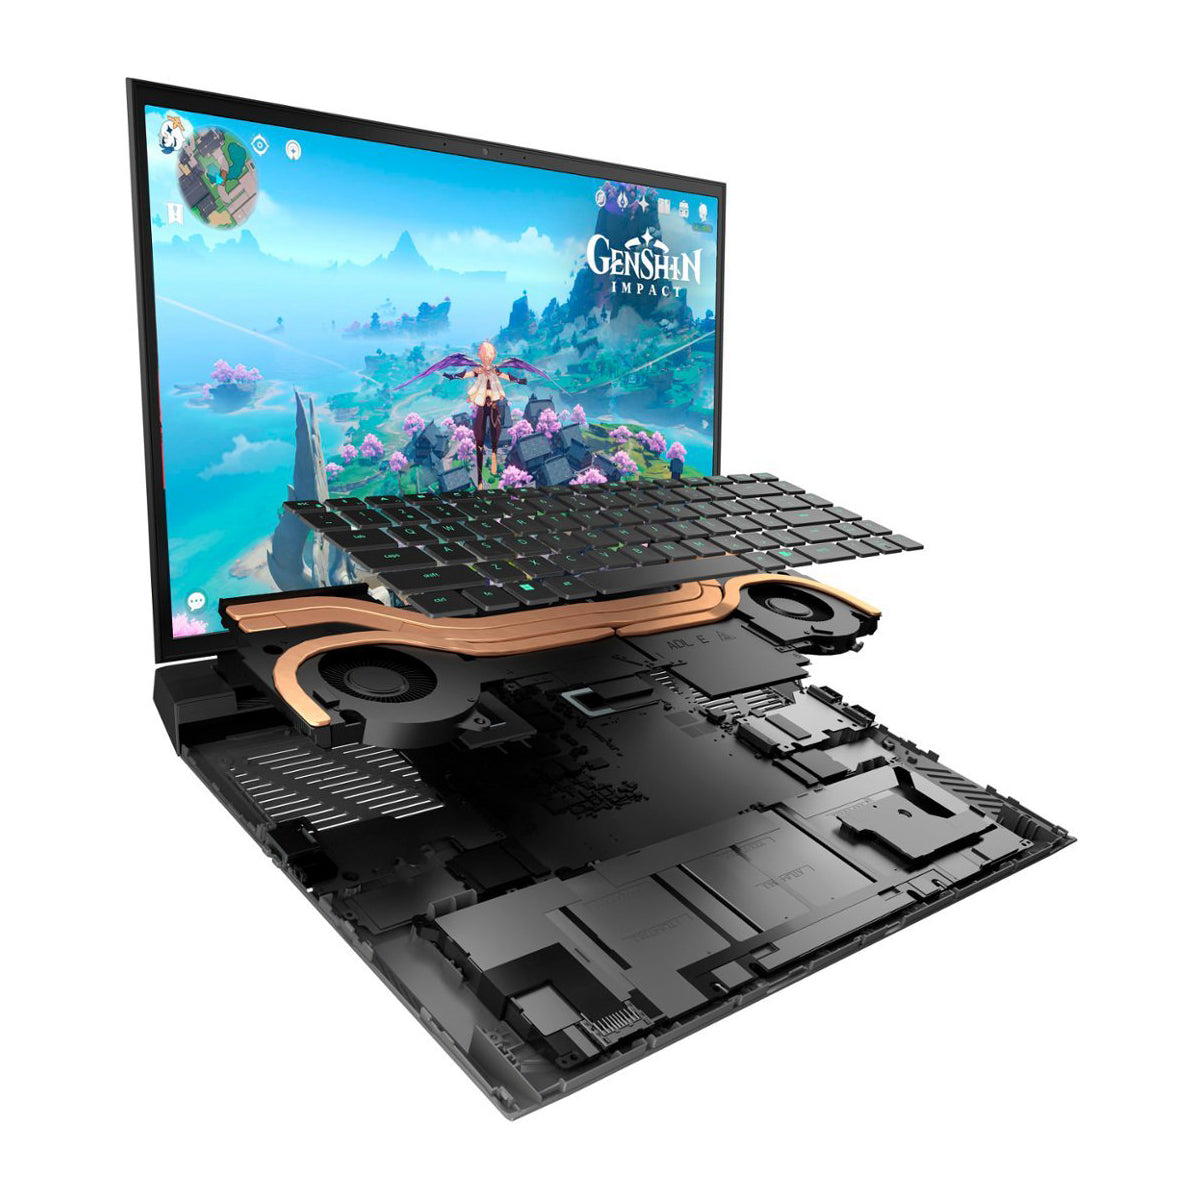 Dell G16 G7620-7775BLK-PUS Core i7-12700h RTX 3060 165hz Qhd+ Gaming Laptop (Brand New) Gaming laptop, Graphic Design laptop, best laptop for gaming, best laptop for graphic design, computer for sale Lebanon, laptop for video editing in Lebanon, laptop for sale Lebanon, best graphic design laptop,	best video editing laptop, best programming laptop, laptop for sale in Lebanon, laptops for sale in Lebanon, laptop for sale in Lebanon, buy computer Lebanon, buy laptop Lebanon.